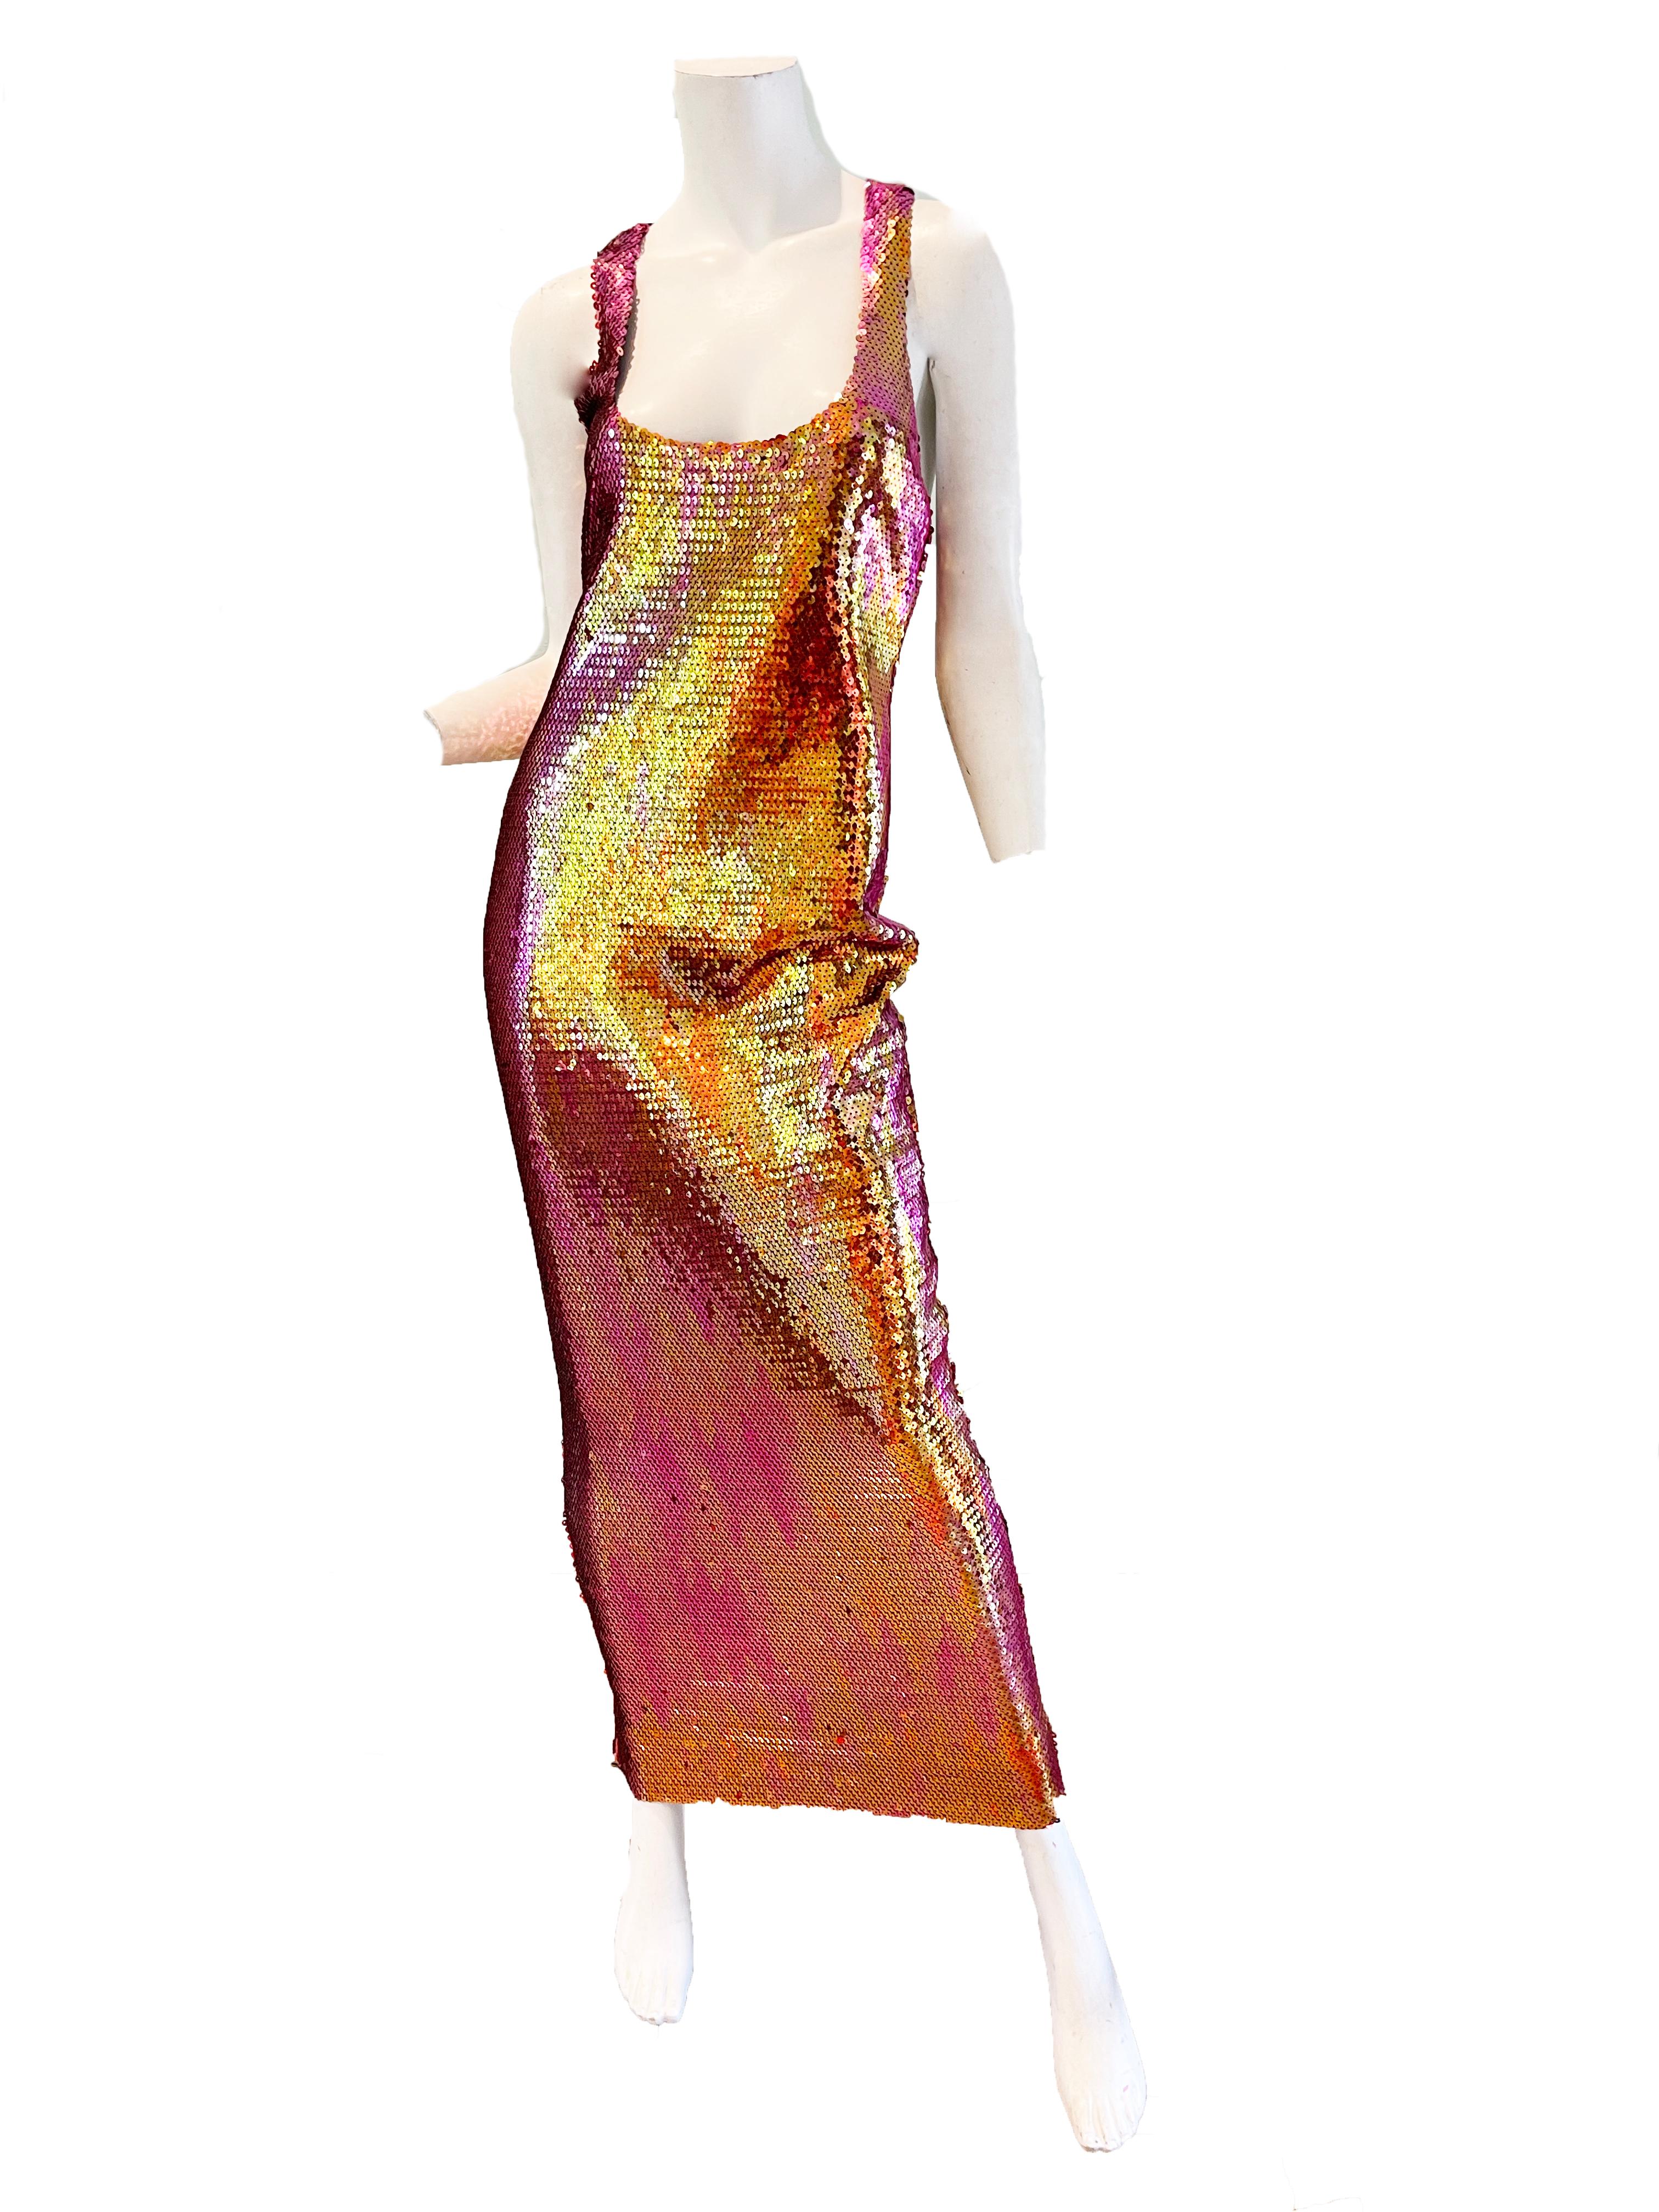 1988 Stephen Sprouse sequin gown with off center racing back. Has stretch. 
Orange, pink and yellow color 
Condition: Excellent
Size 6 